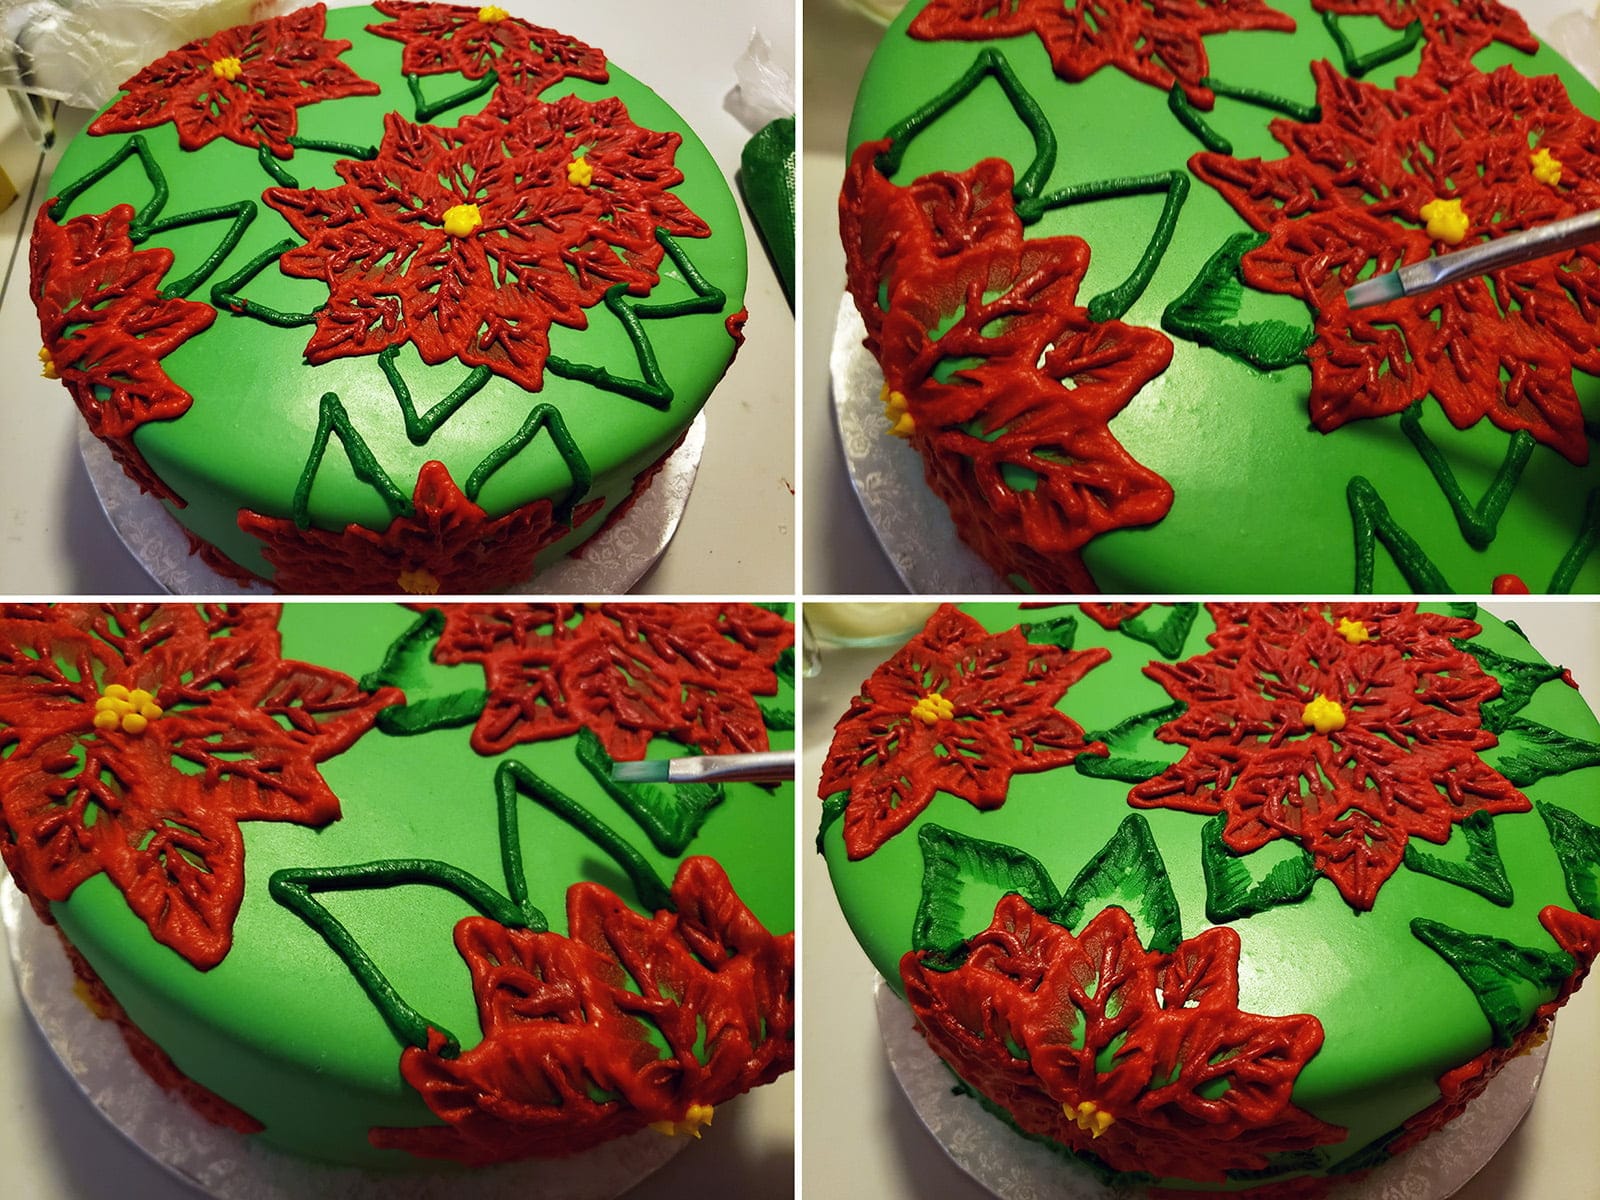 A collage of 4 images demonstrating the steps described above - piping green leaves onto this brush embroidery poinsettia cake.